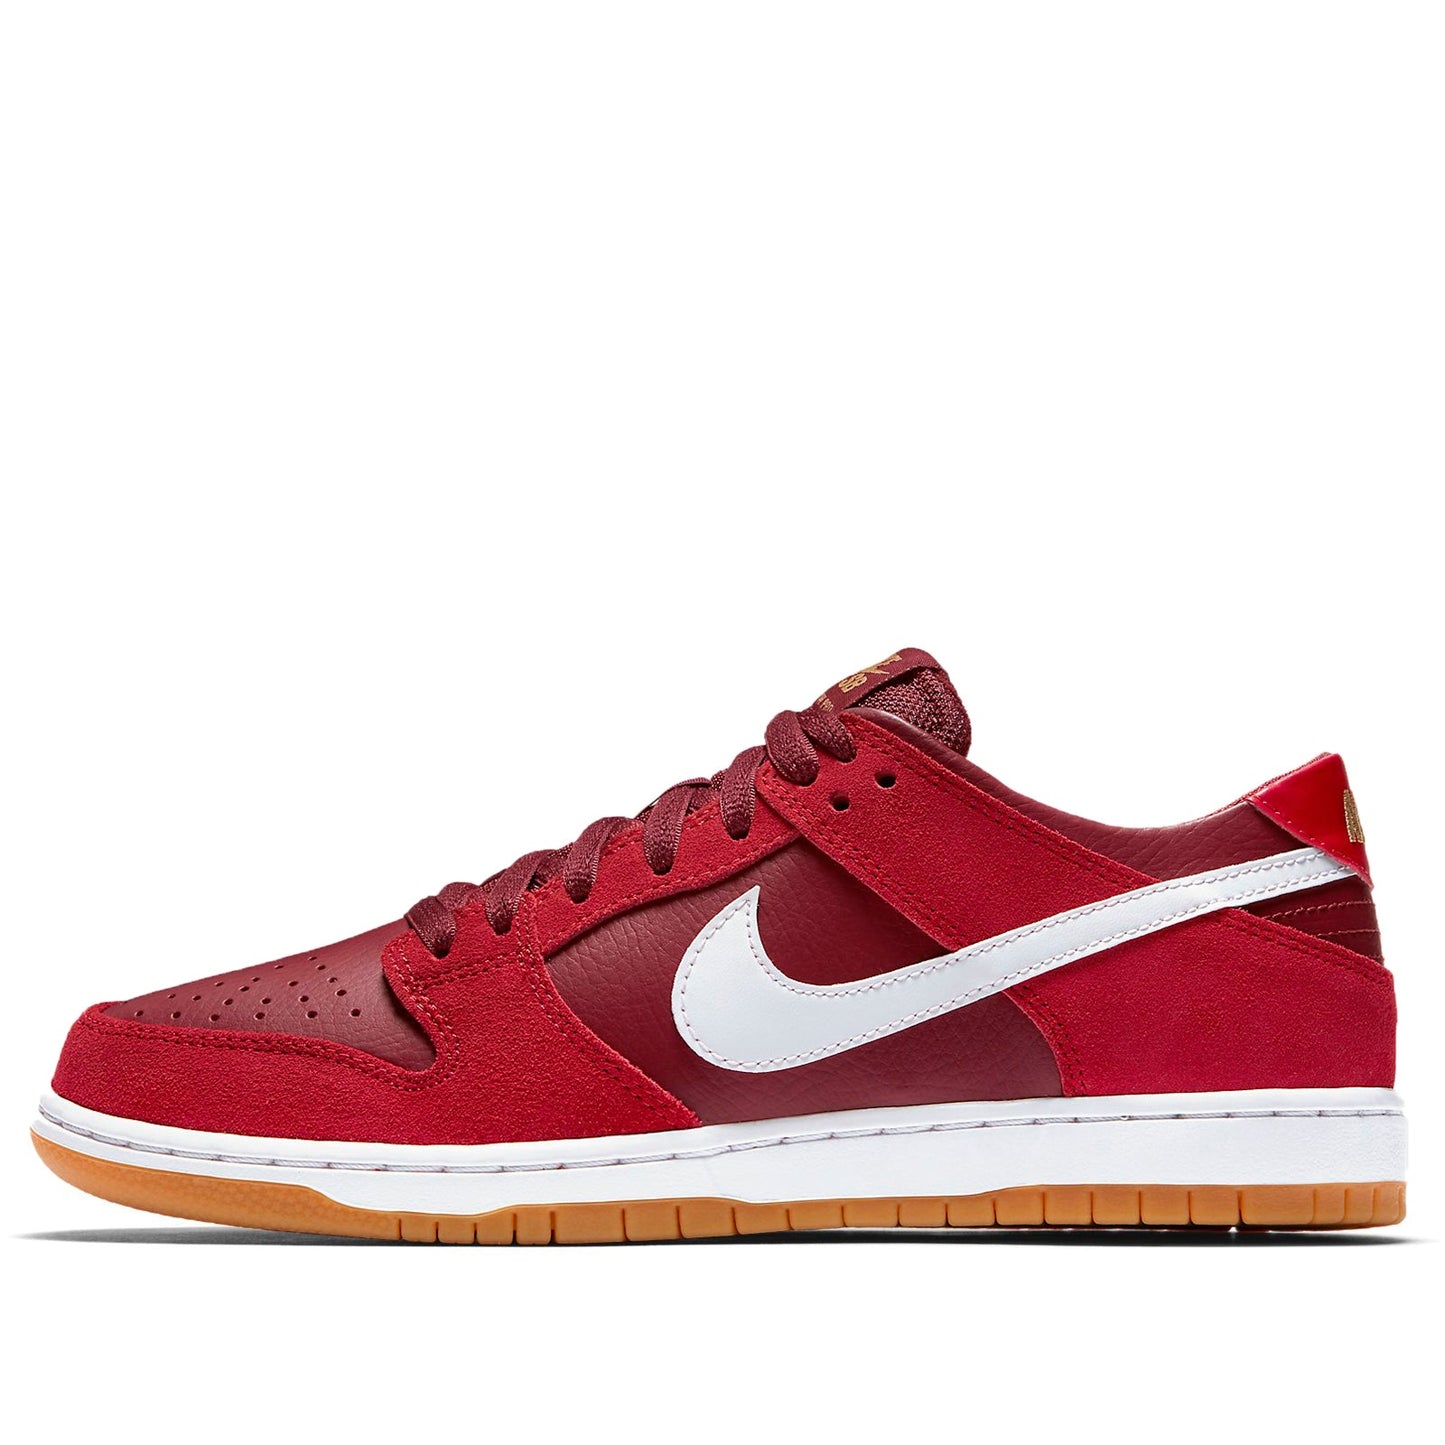 Nike Zoom Dunk Low Pro SB 'Track Red'  854866-616 Classic Sneakers